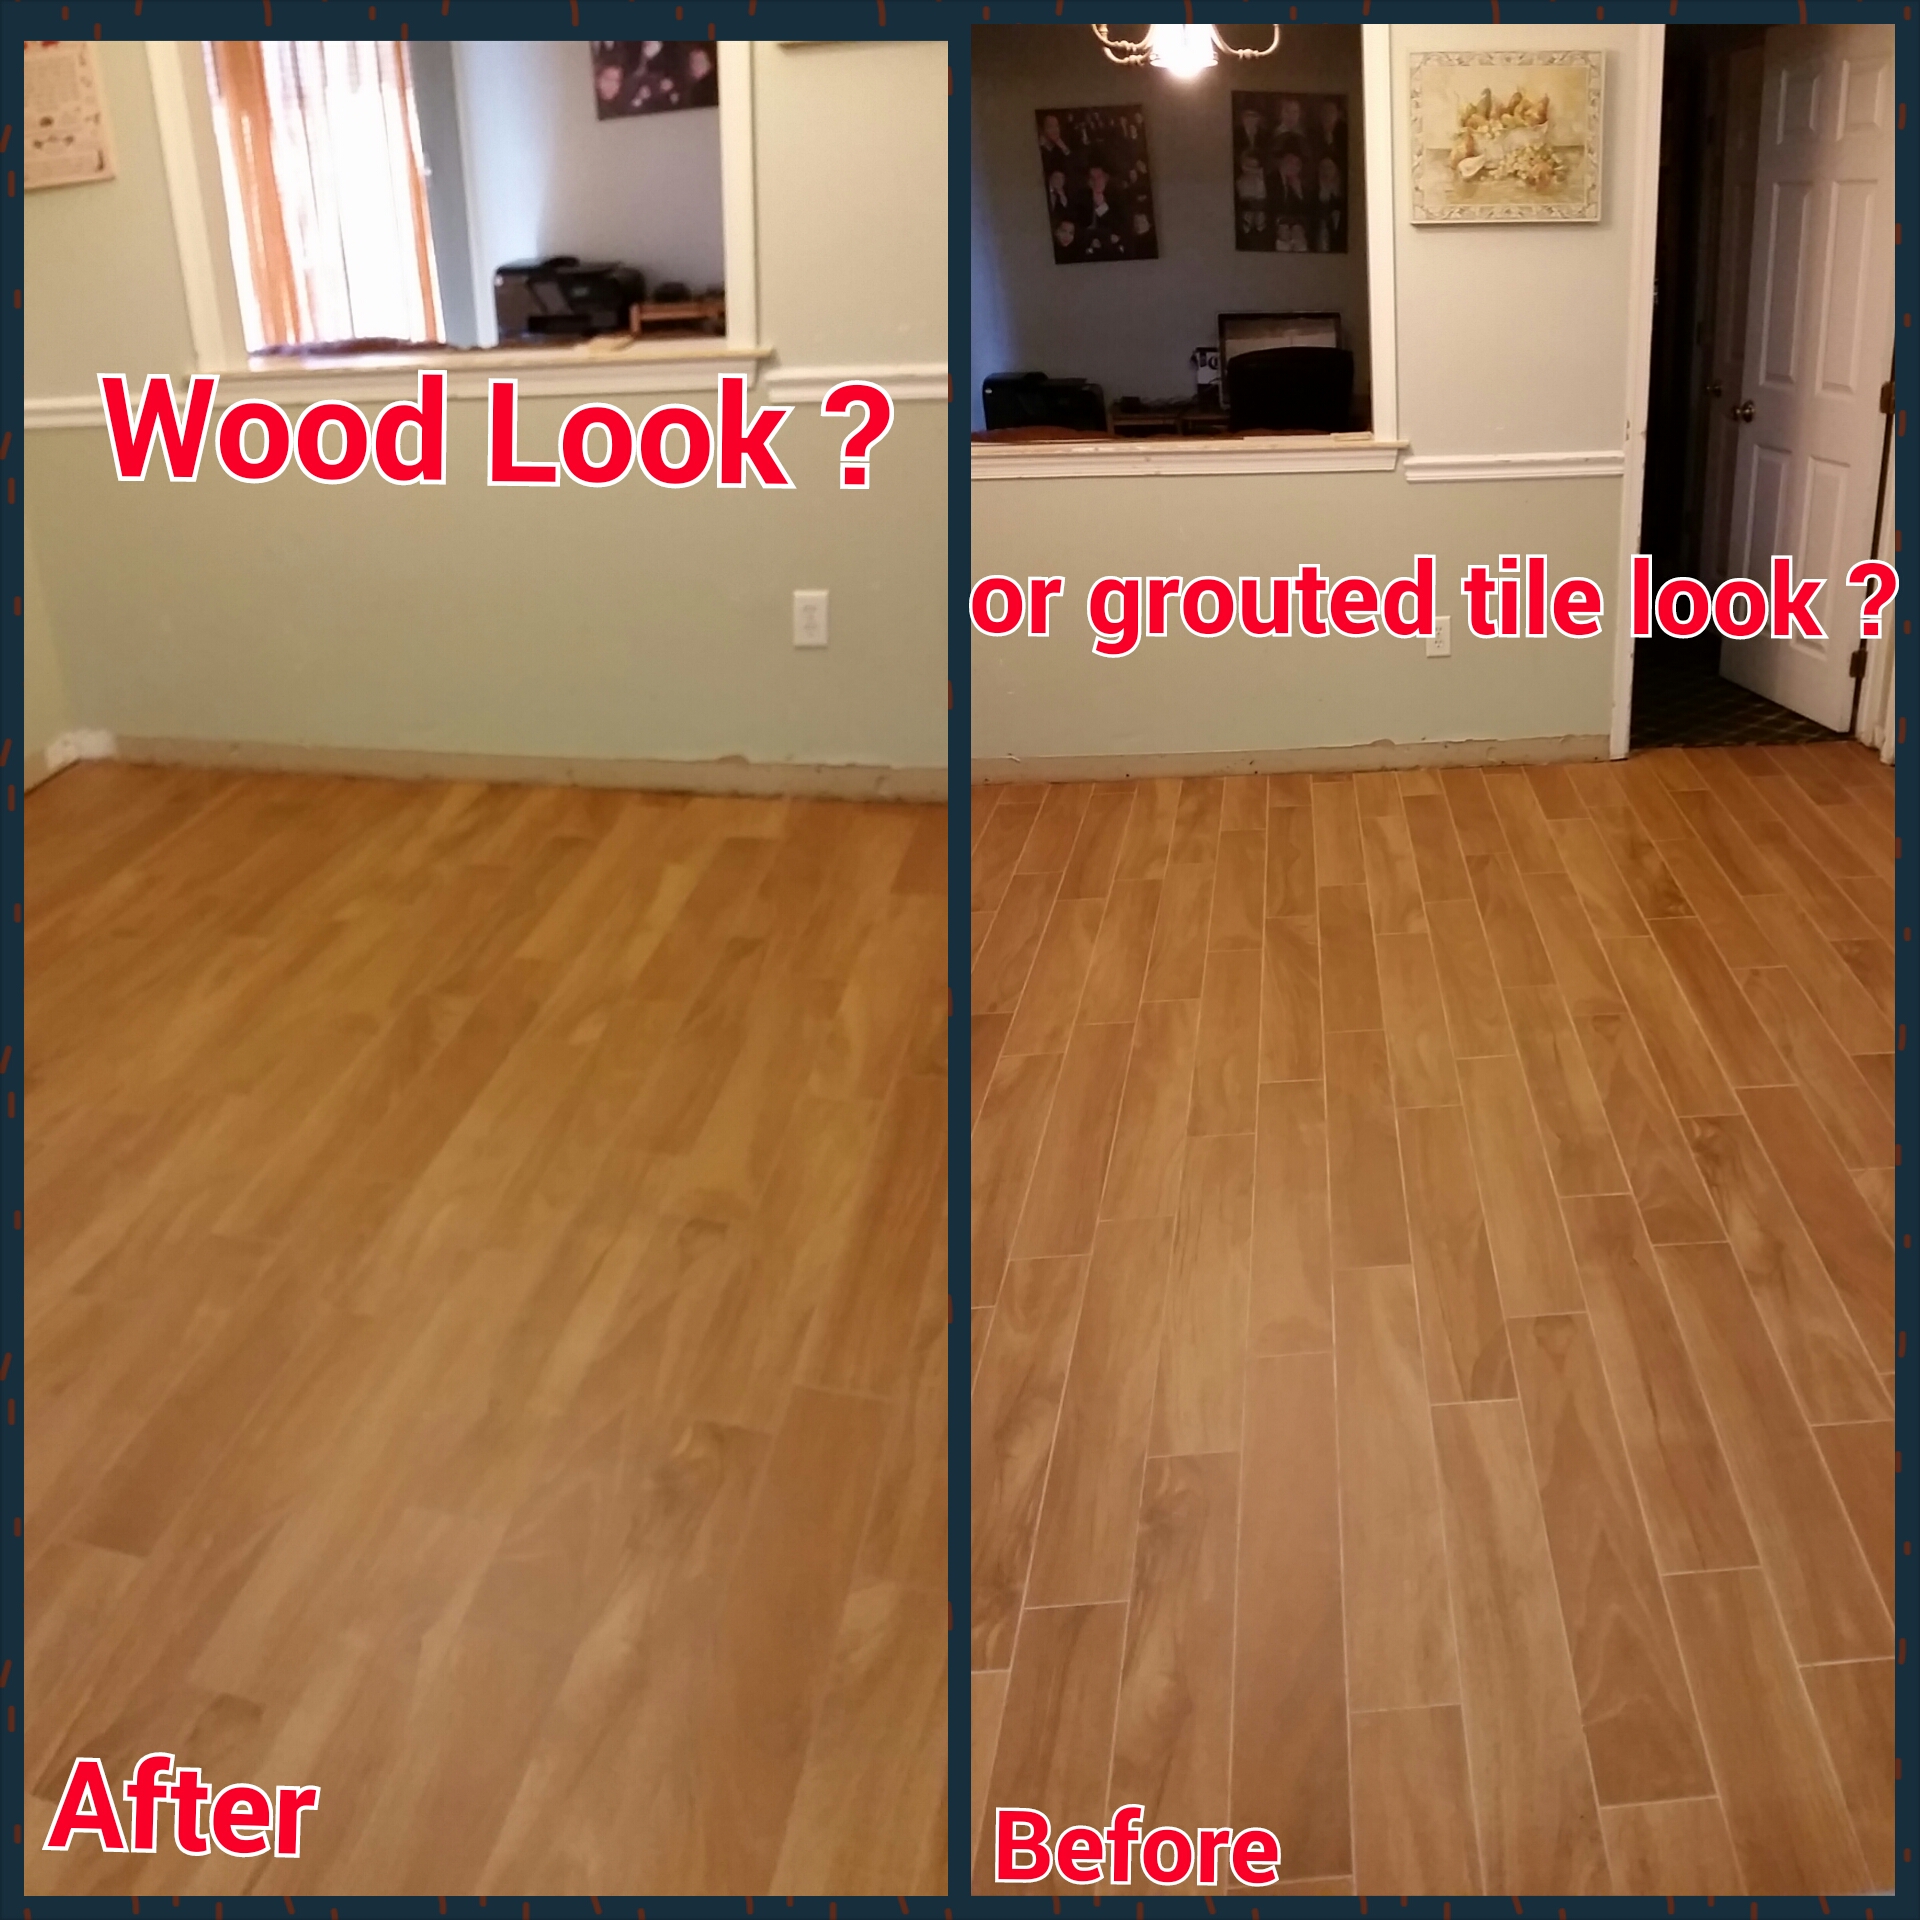 Can Wood Look Tile Really Like, How To Choose Grout Color For Wood Look Tile